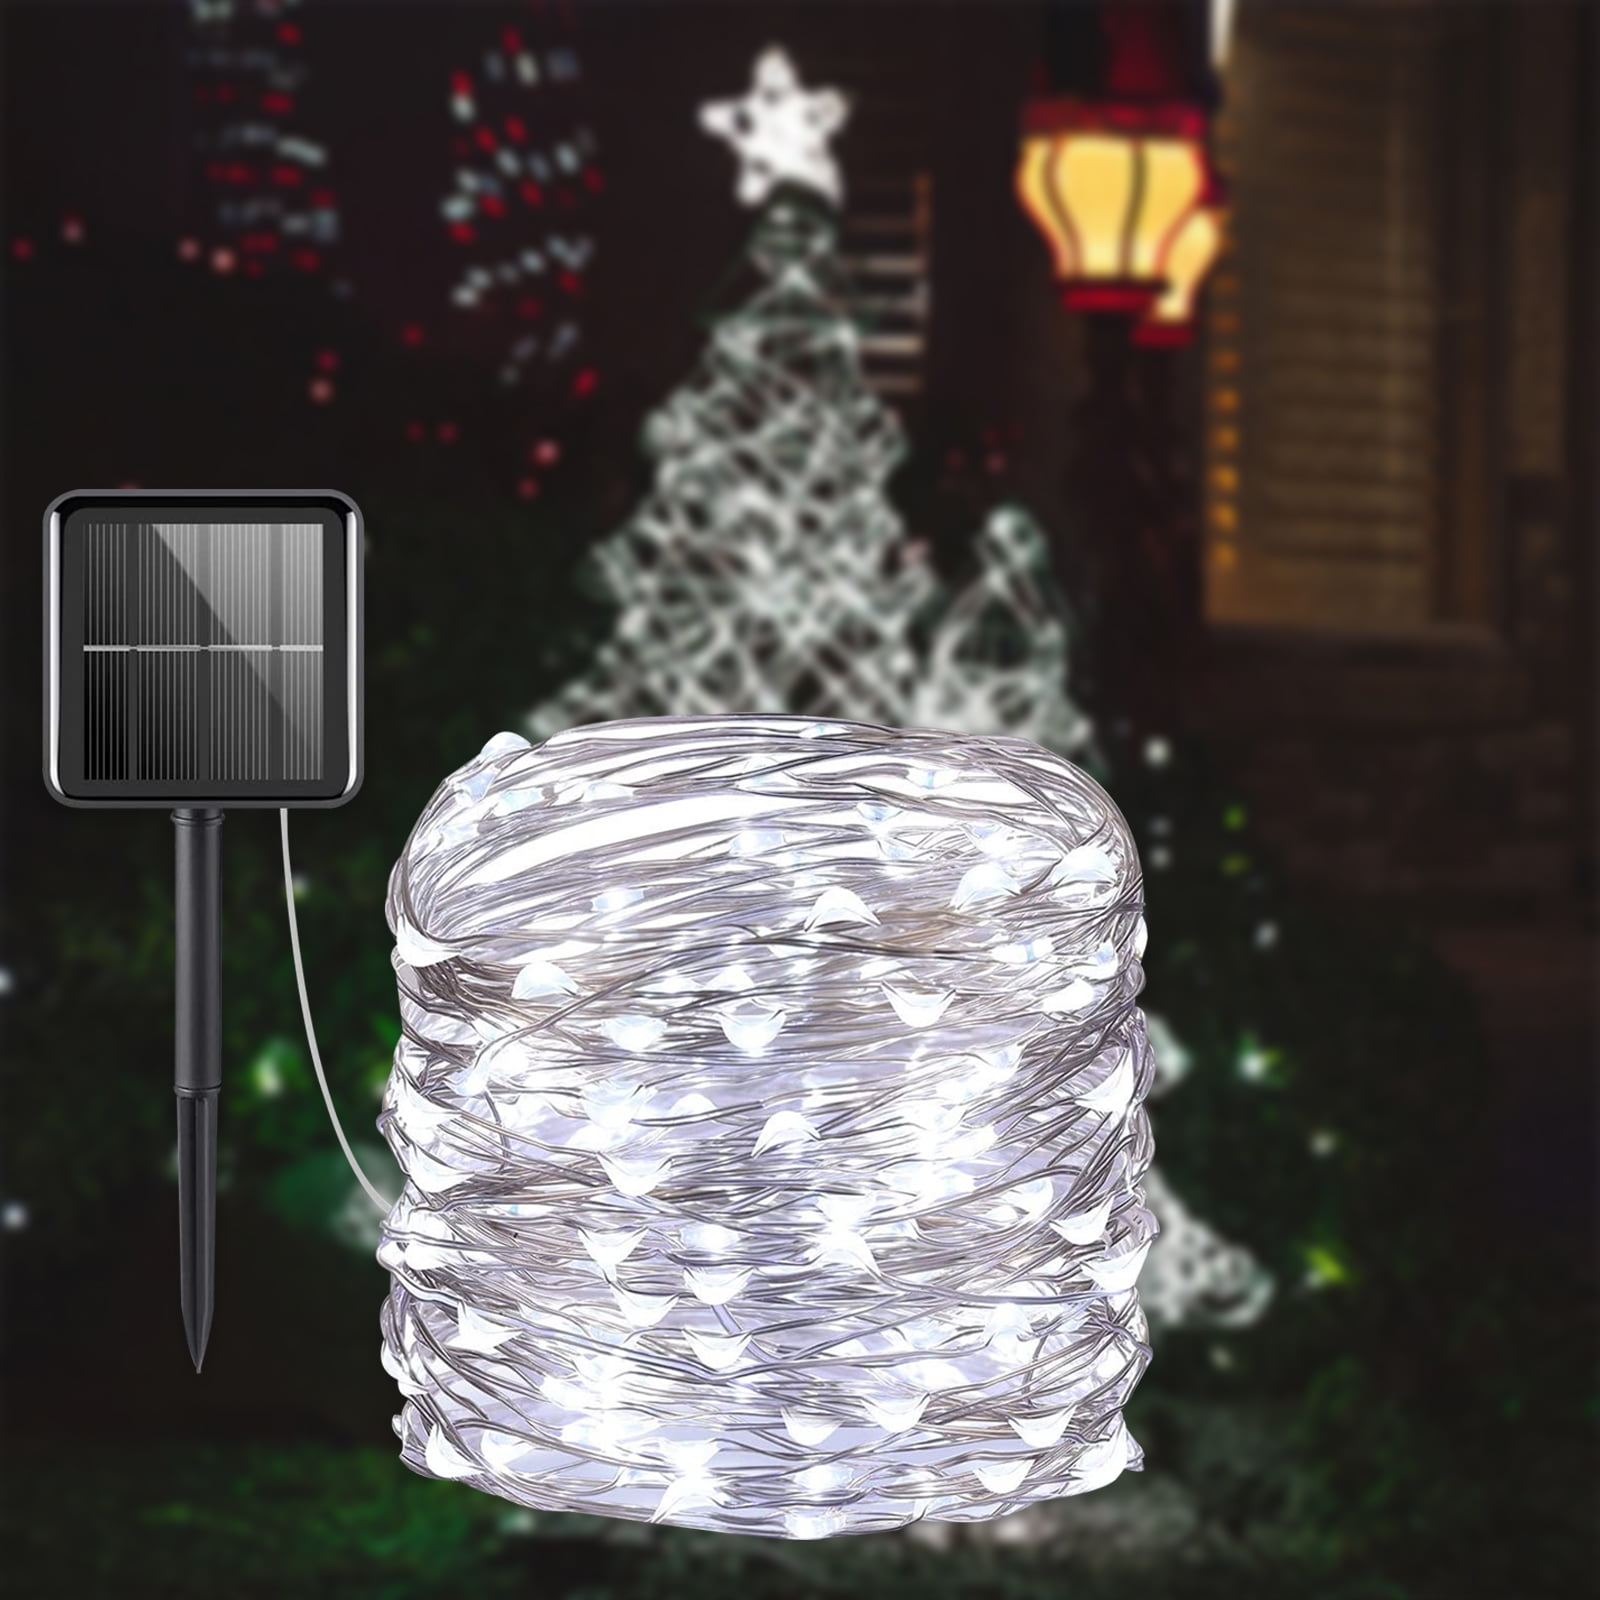 Solar Fairy String Lights 200 LED Copper Wire Waterproof Garden Decor Xmas Party